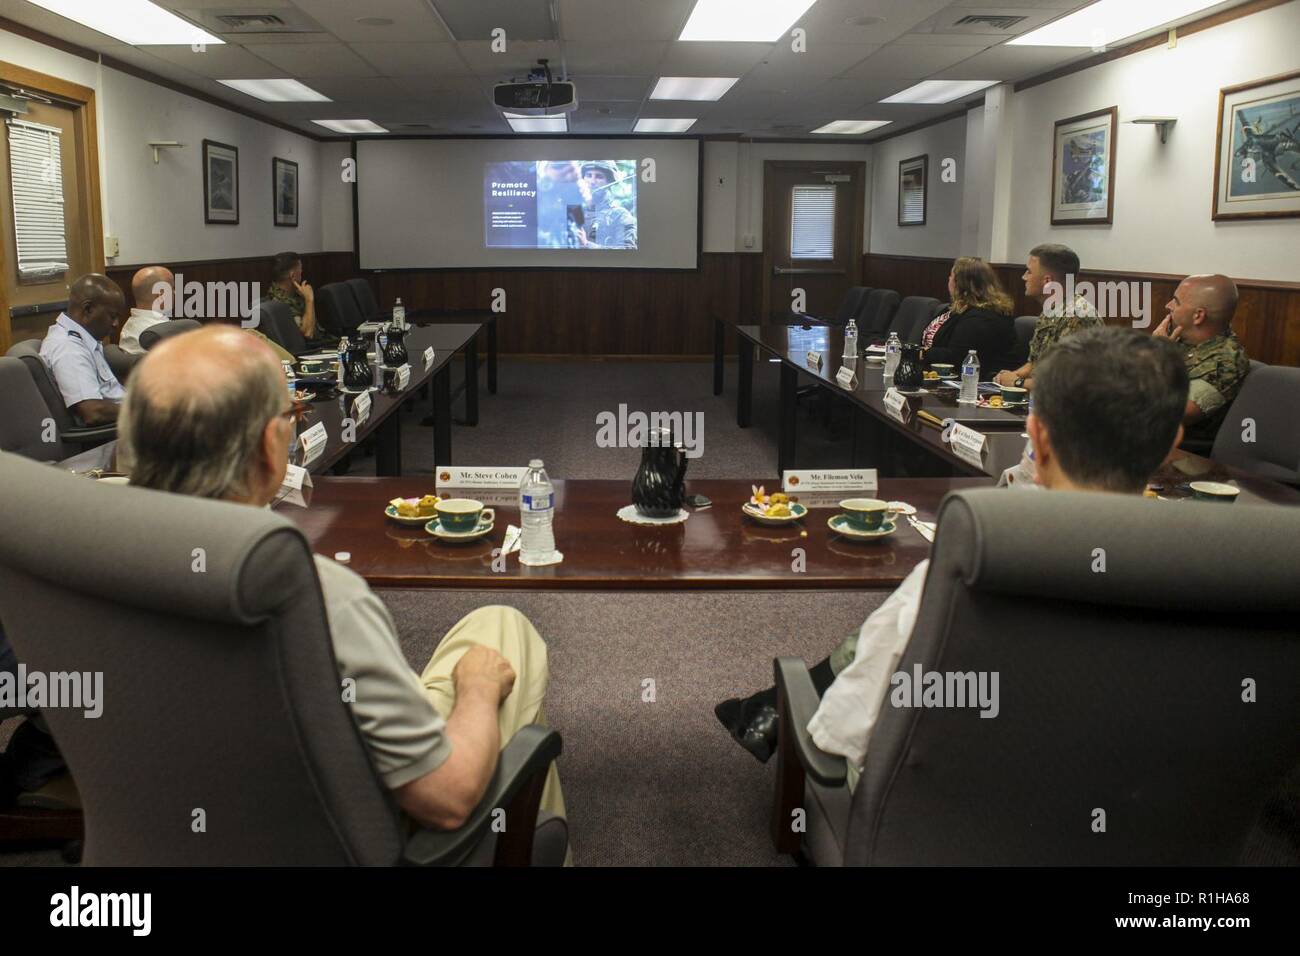 Rep. Steve Cohen (D-TN), House of Judiciary Committee, and Rep. Filemon Vela (D-TX), House of Homeland Security Committee, Border and Maritime Security Subcommittee, watch a video during a command brief at the Marine Corps Base Hawaii (MCBH) headquarters building, Sept. 19, 2018. Rep. Steve Cohen and Rep. Filemon Vela visited MCBH to learn about the installation's support to operational readiness while maintaining awareness of cultural and environmental issues within the training areas, ranges and other aspects of the region. With this engagement, the Representative's will provide Members of C Stock Photo